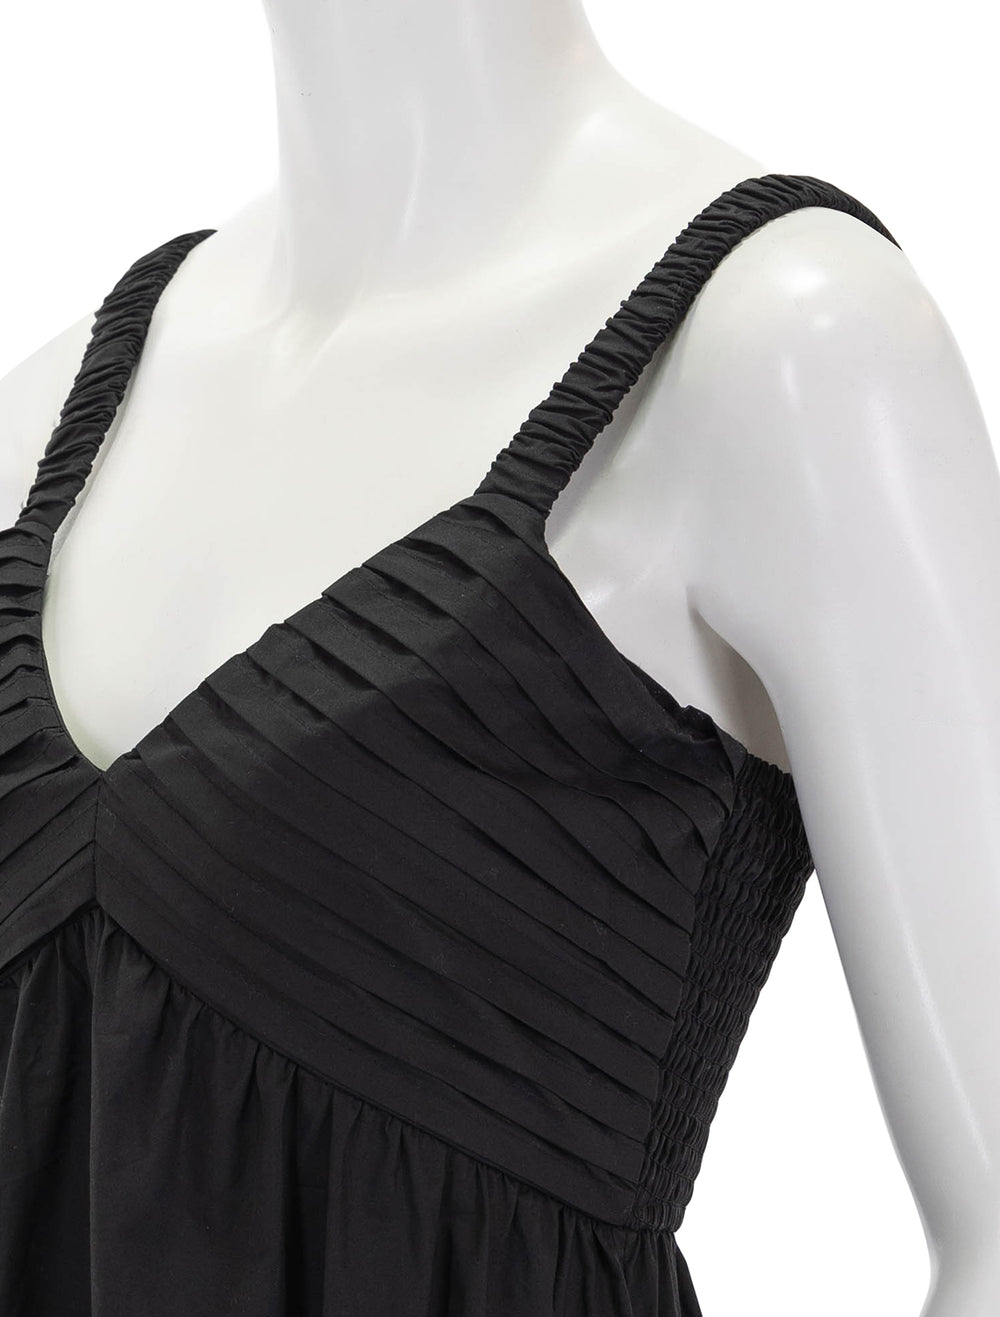 Close-up view of Steve Madden's eloria dress in black.